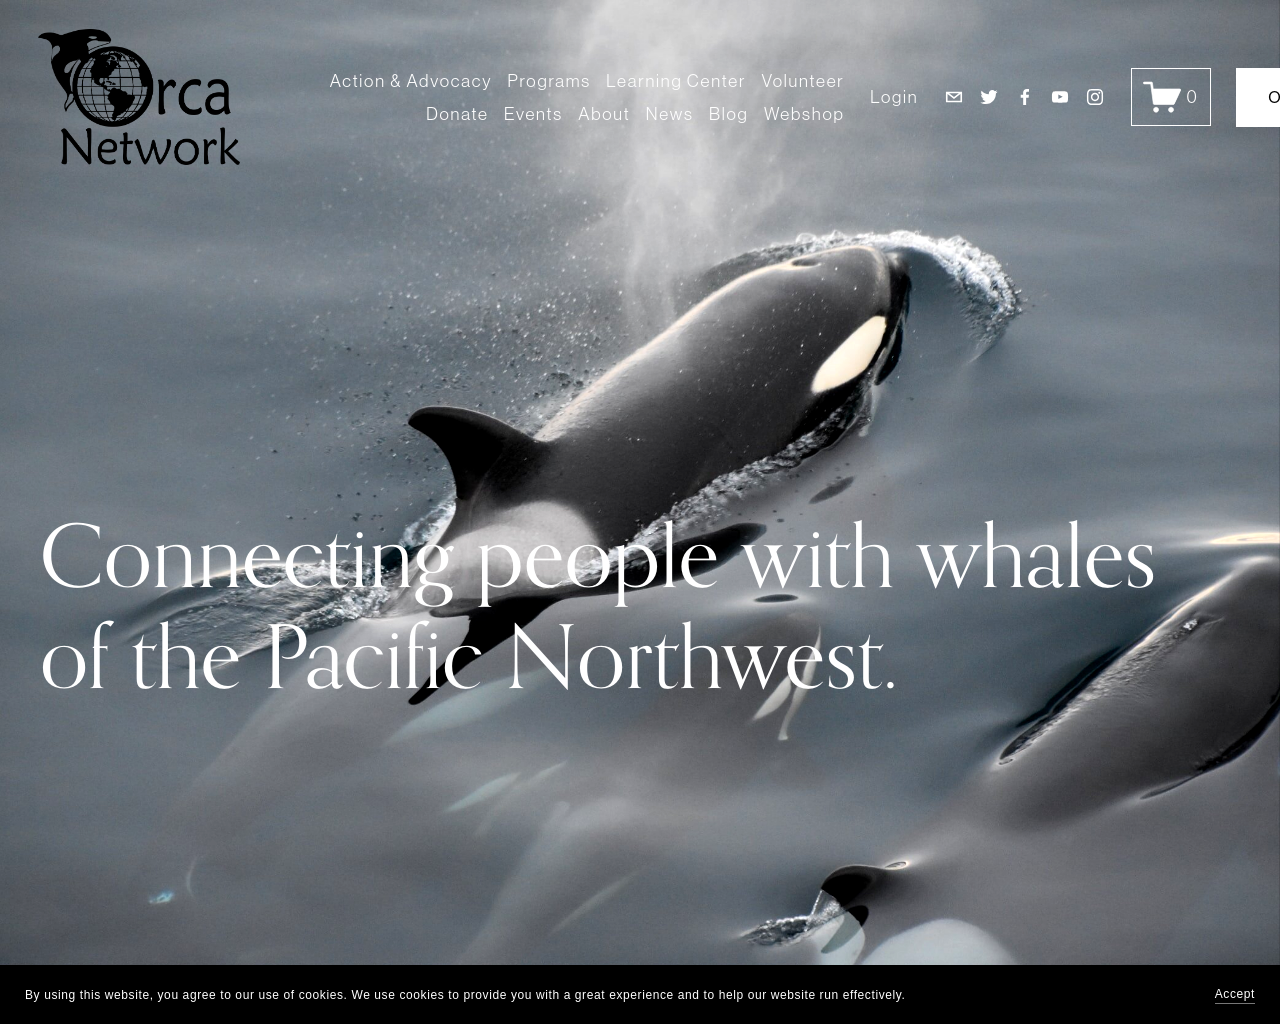 orcanetwork.org